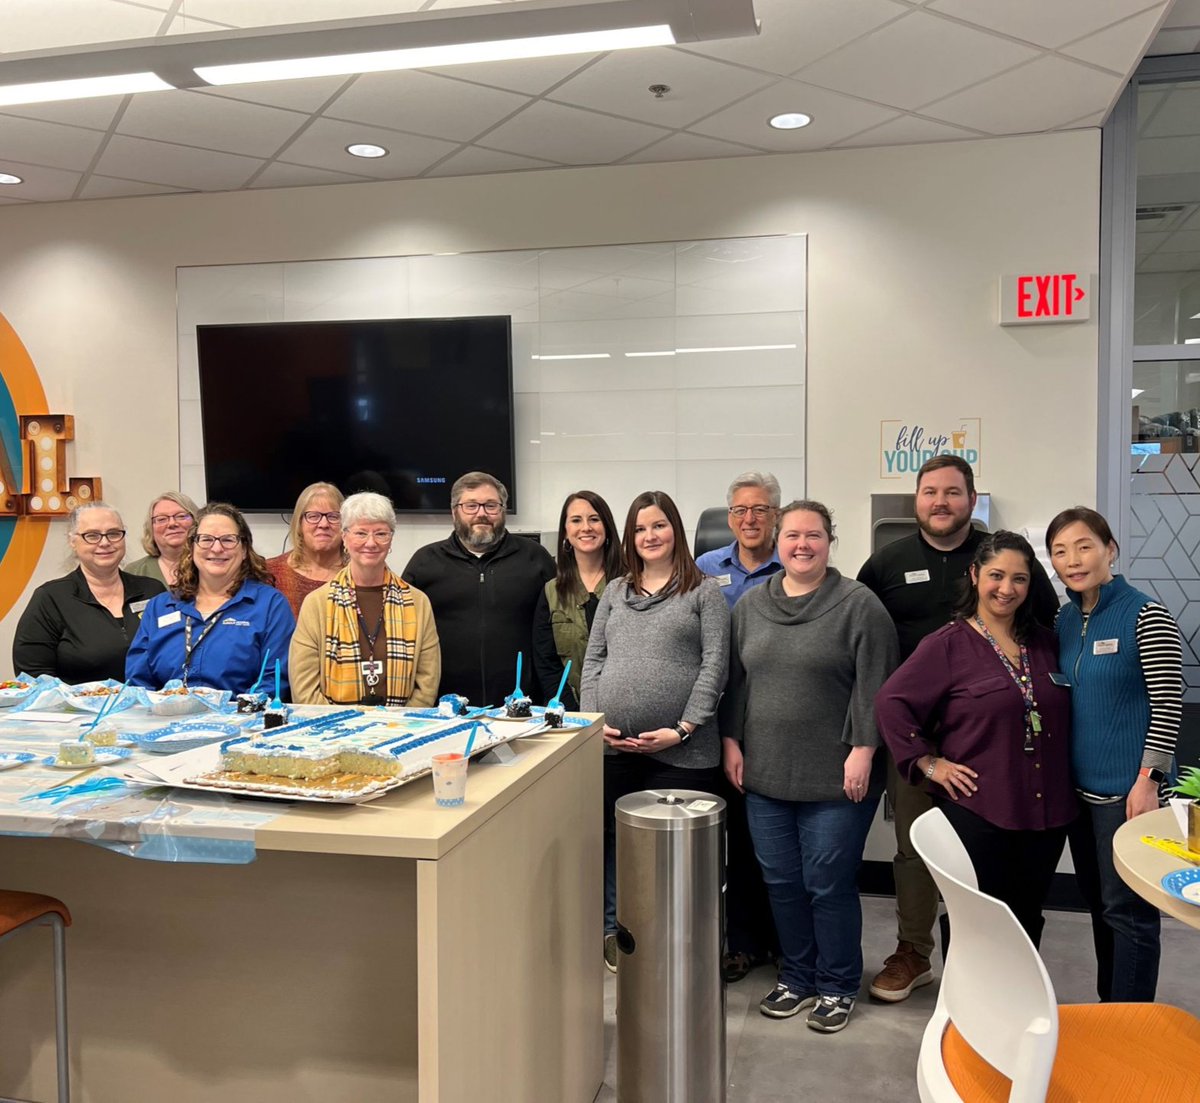 Congratulations to Yuri in Accounting on the birth of her beautiful baby boy last week! Our Accounting Services team hosted a wonderful celebration before sending her off on maternity leave. We're so happy for Yuri and her family! 💛🖤